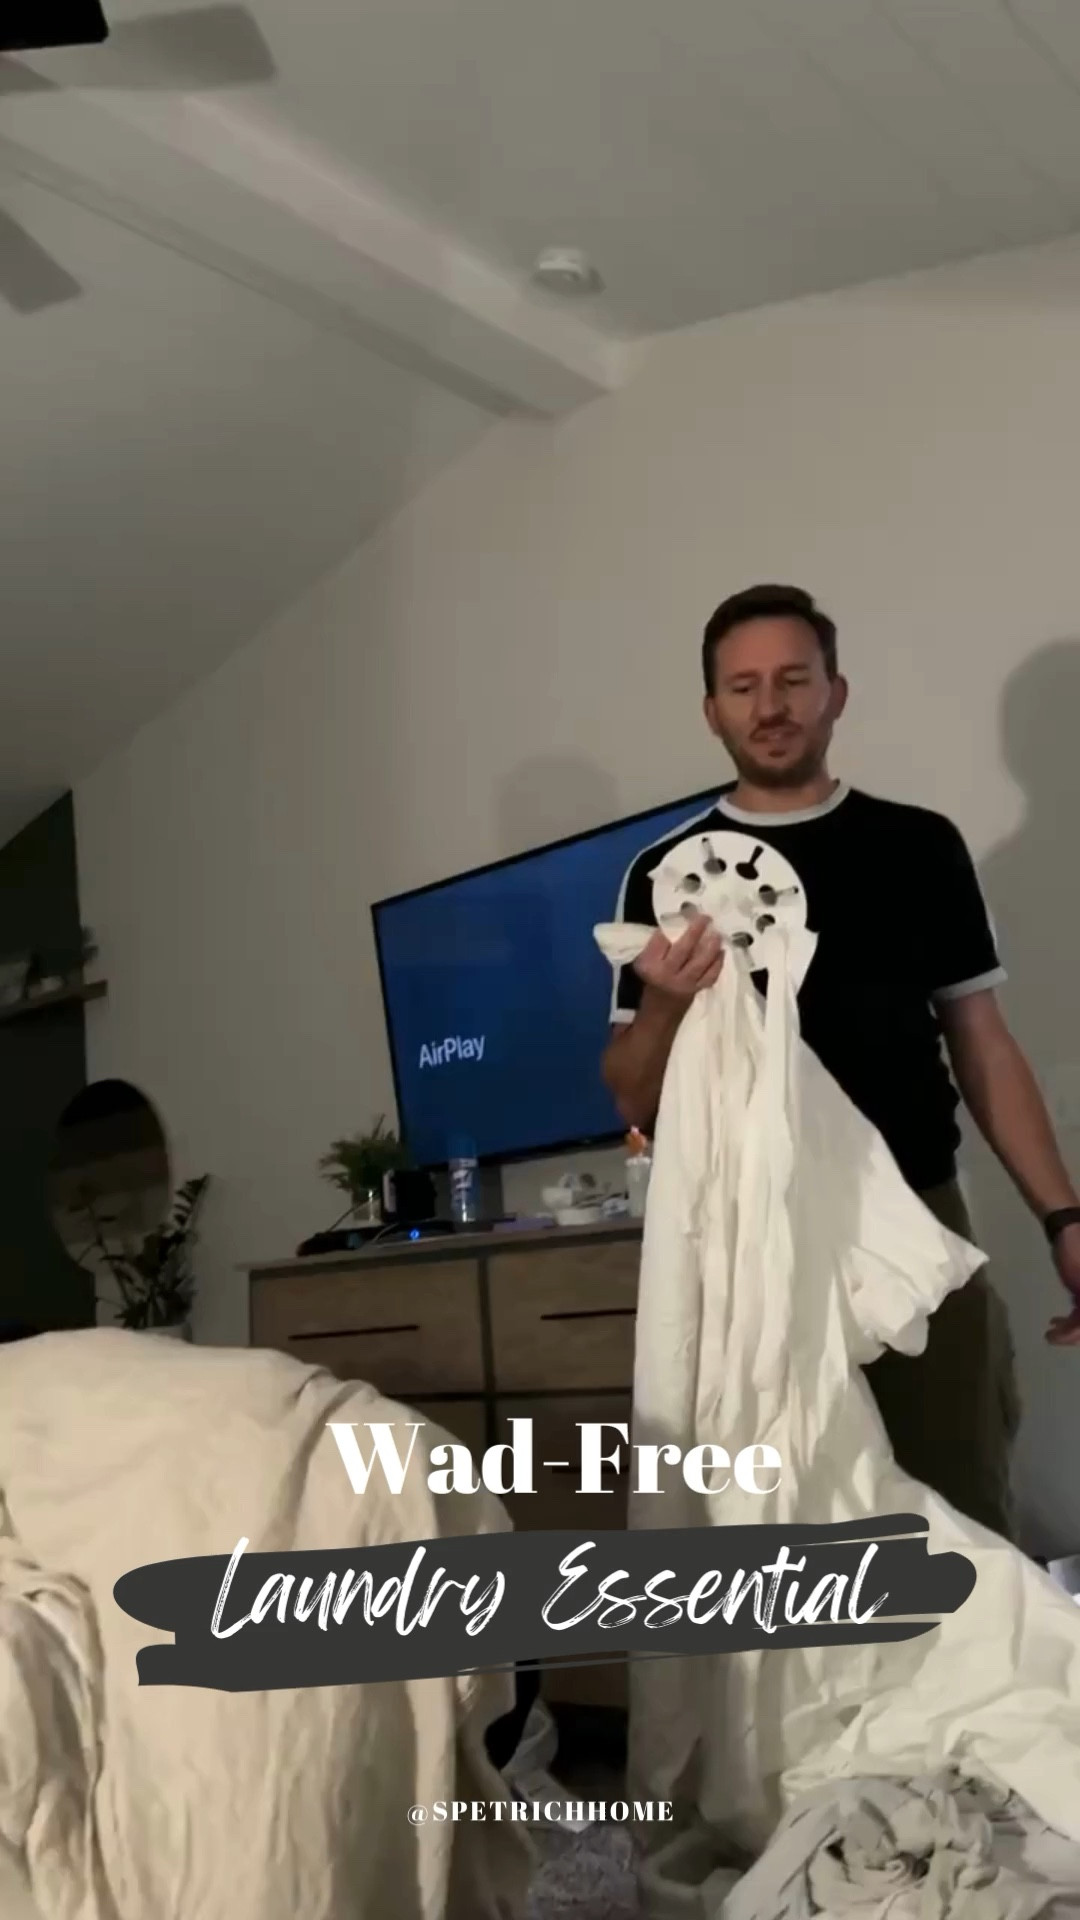  Wad-Free for Blankets & Duvet Covers - As Seen on